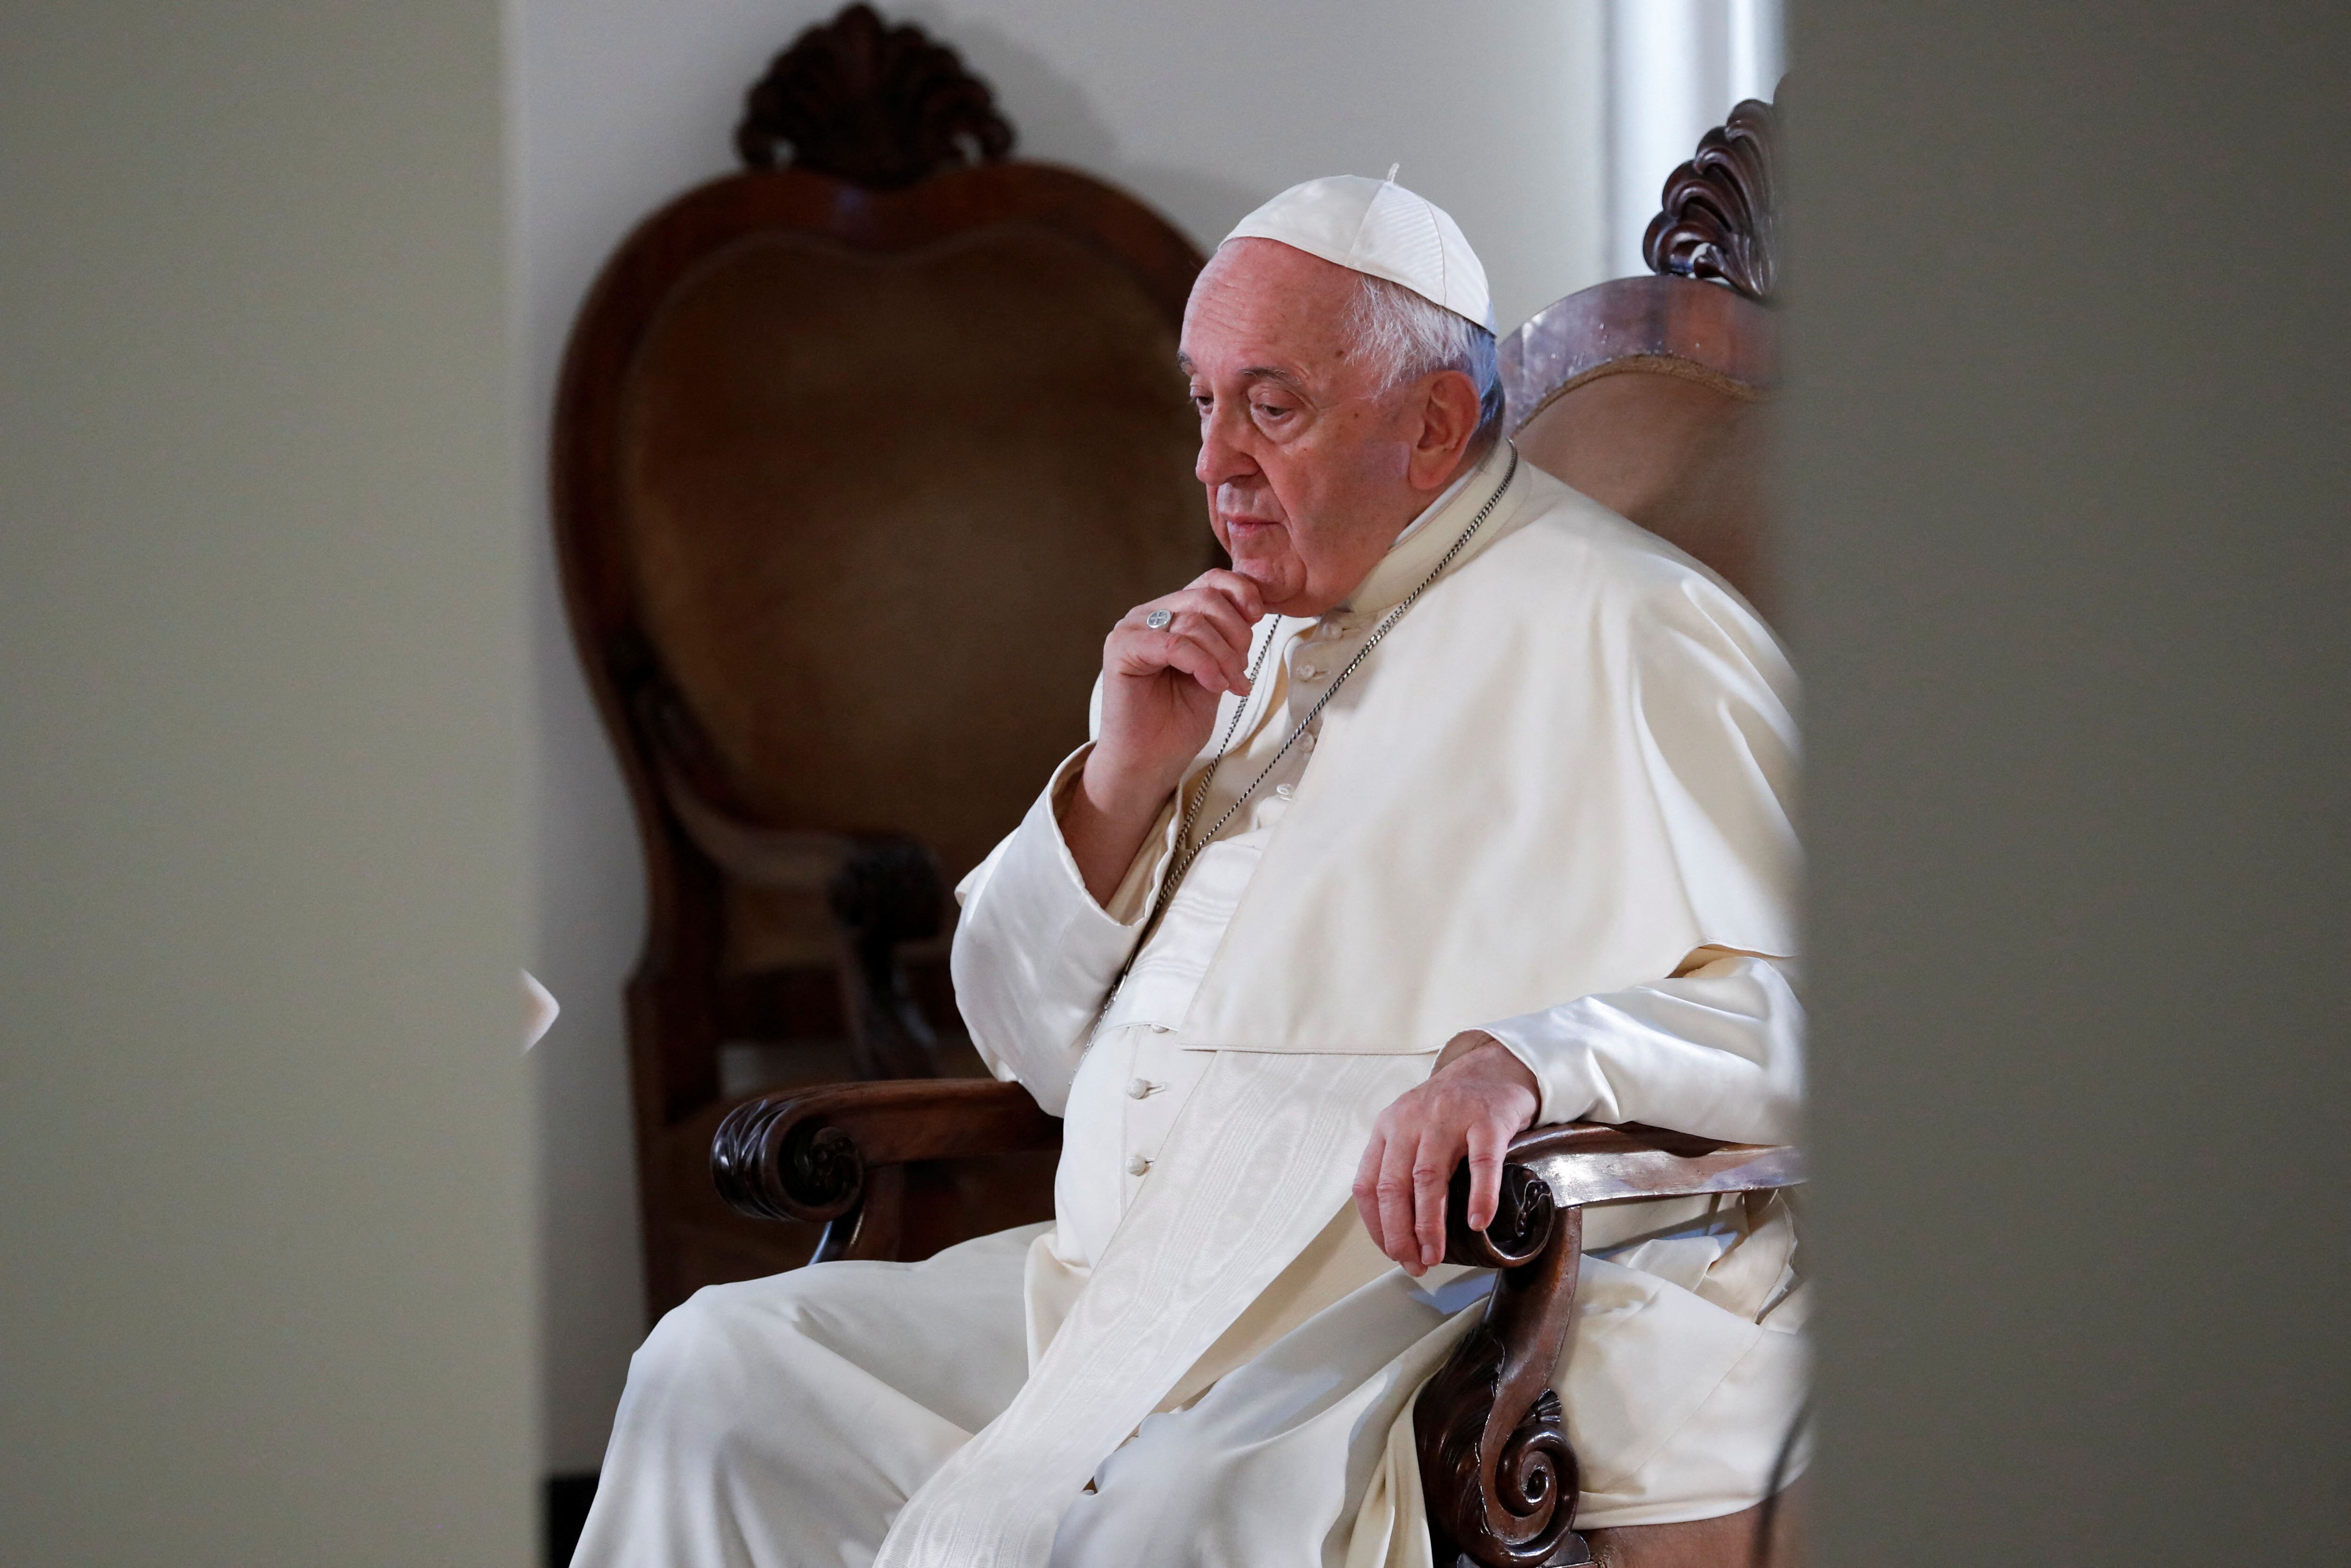 Pope Francis looks on during an exclusive interview with Reuters, at the Vatican, July 2, 2022. REUTERS/Remo Casilli